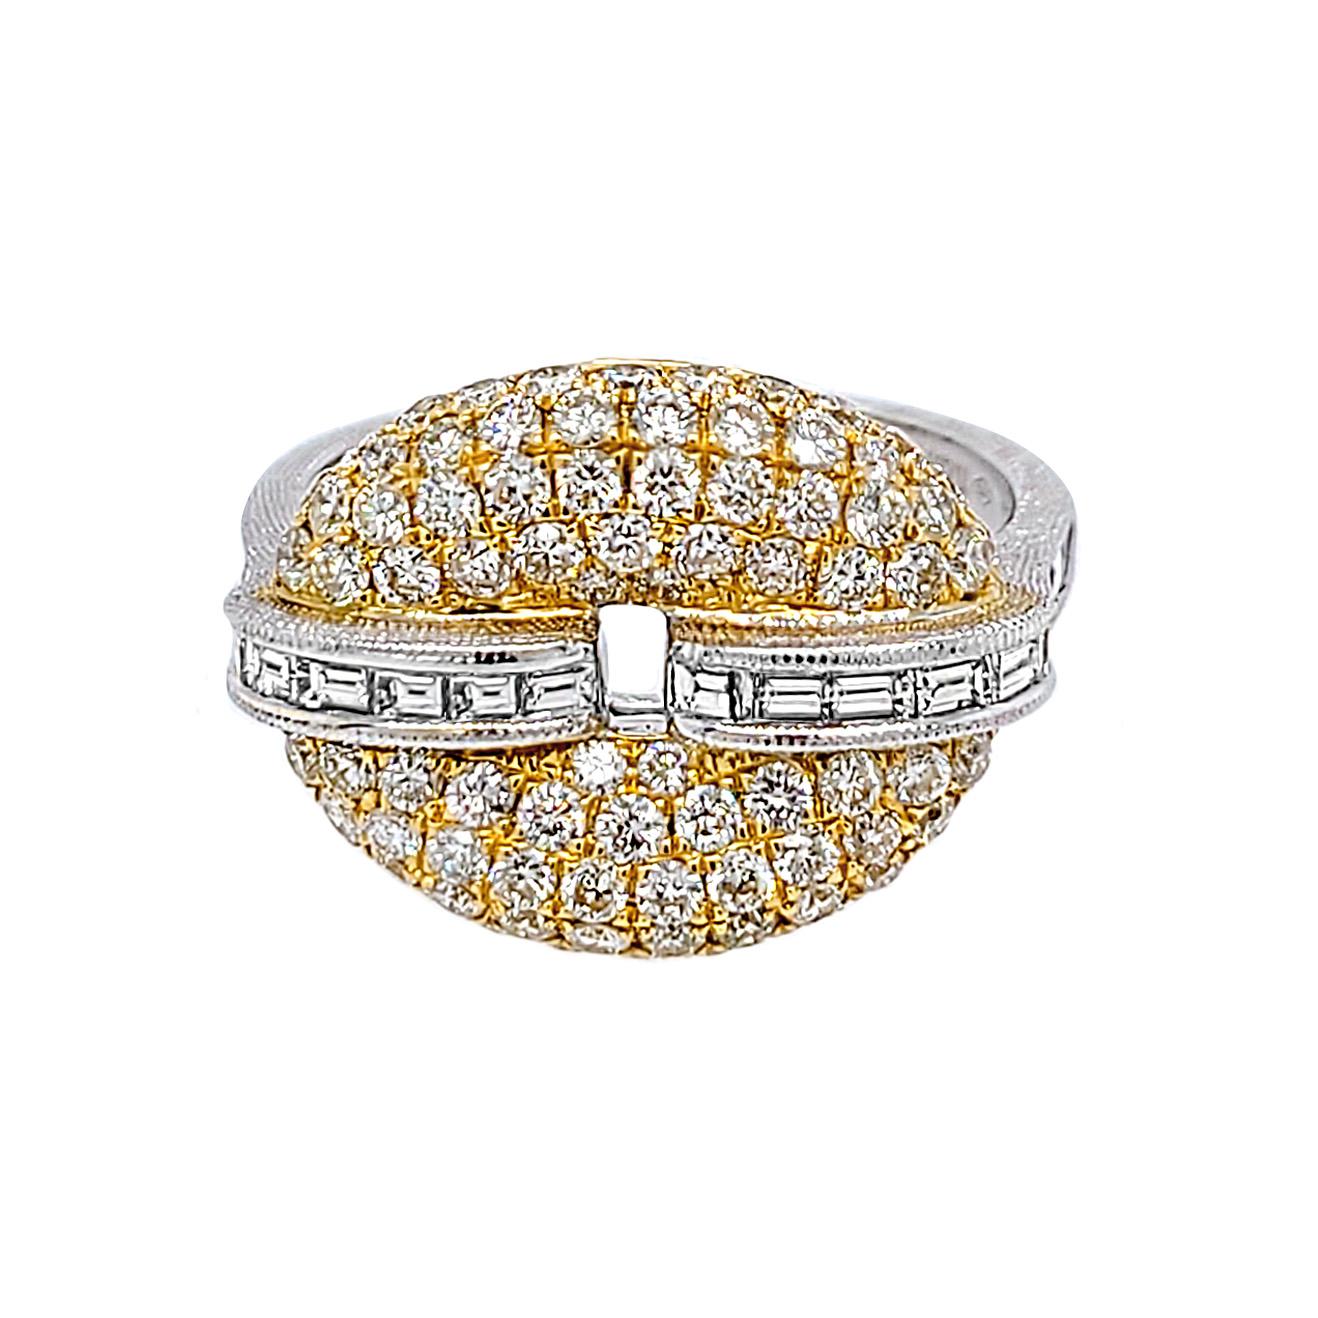 Florentine Finished Two-Tone 18 Karat Gold Italian Cocktail Diamond Ring In New Condition For Sale In Los Angeles, CA